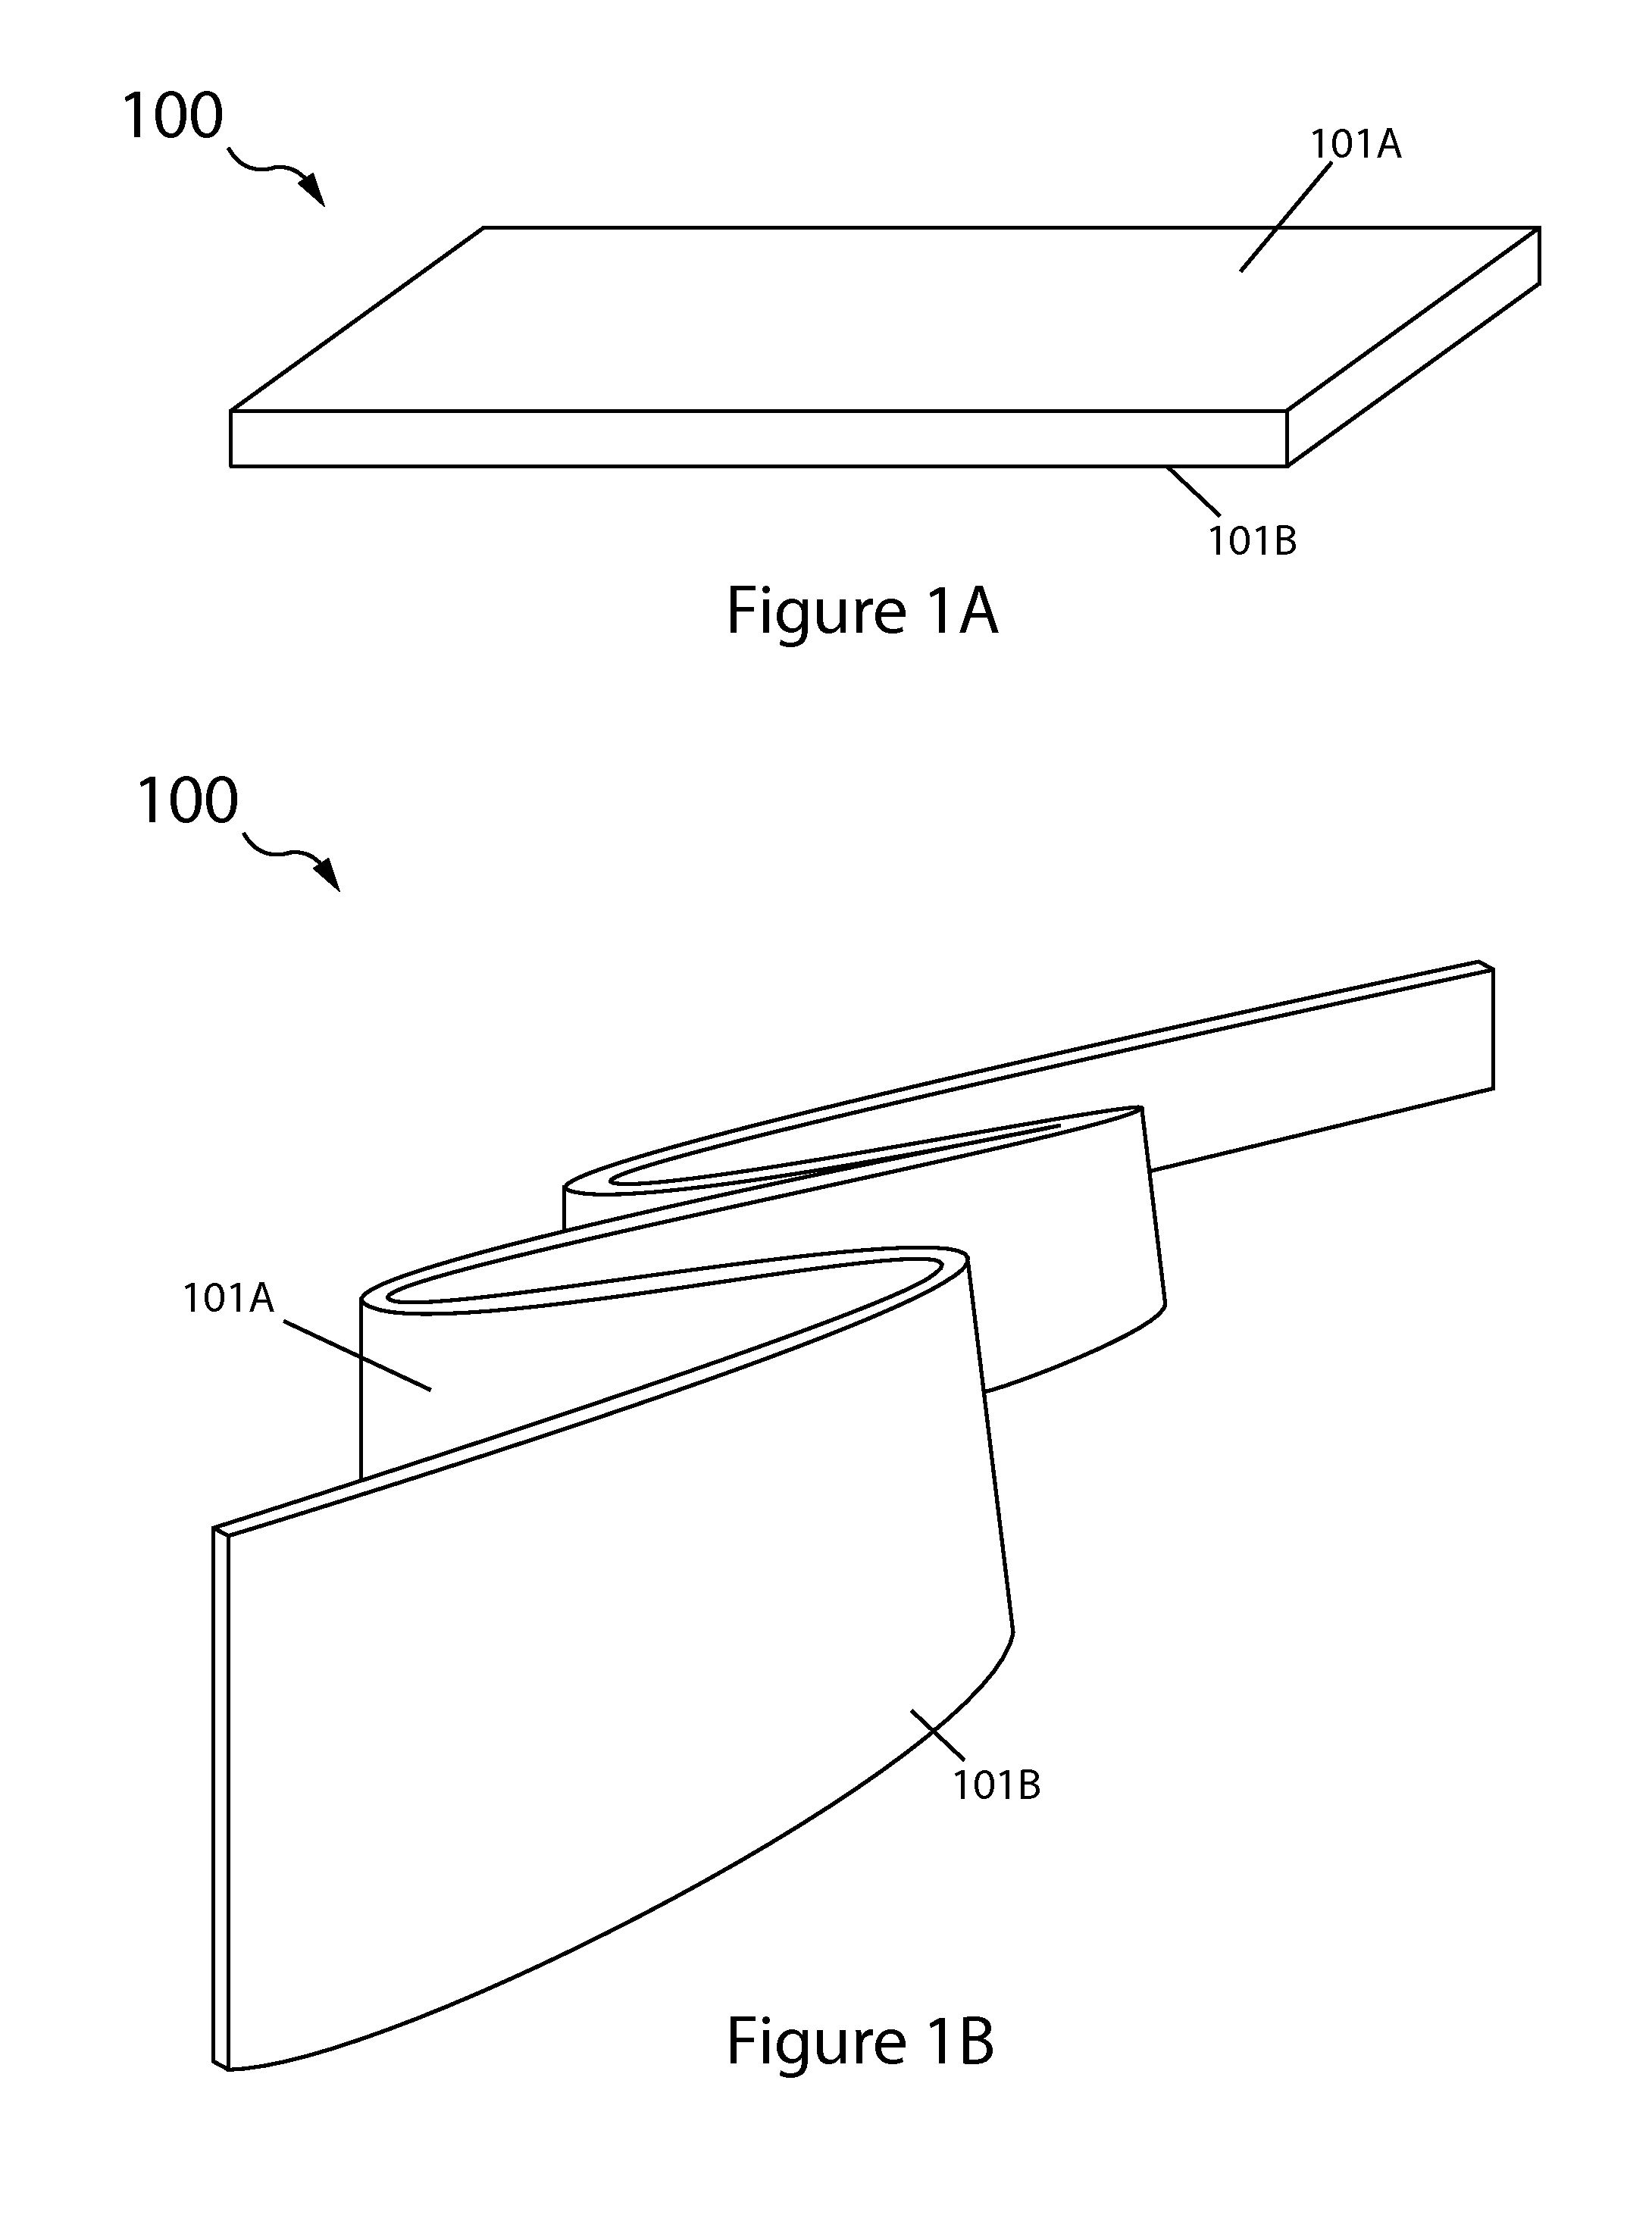 Standalone sulfide based lithium ion-conducting glass solid electrolyte and associated structures, cells and methods